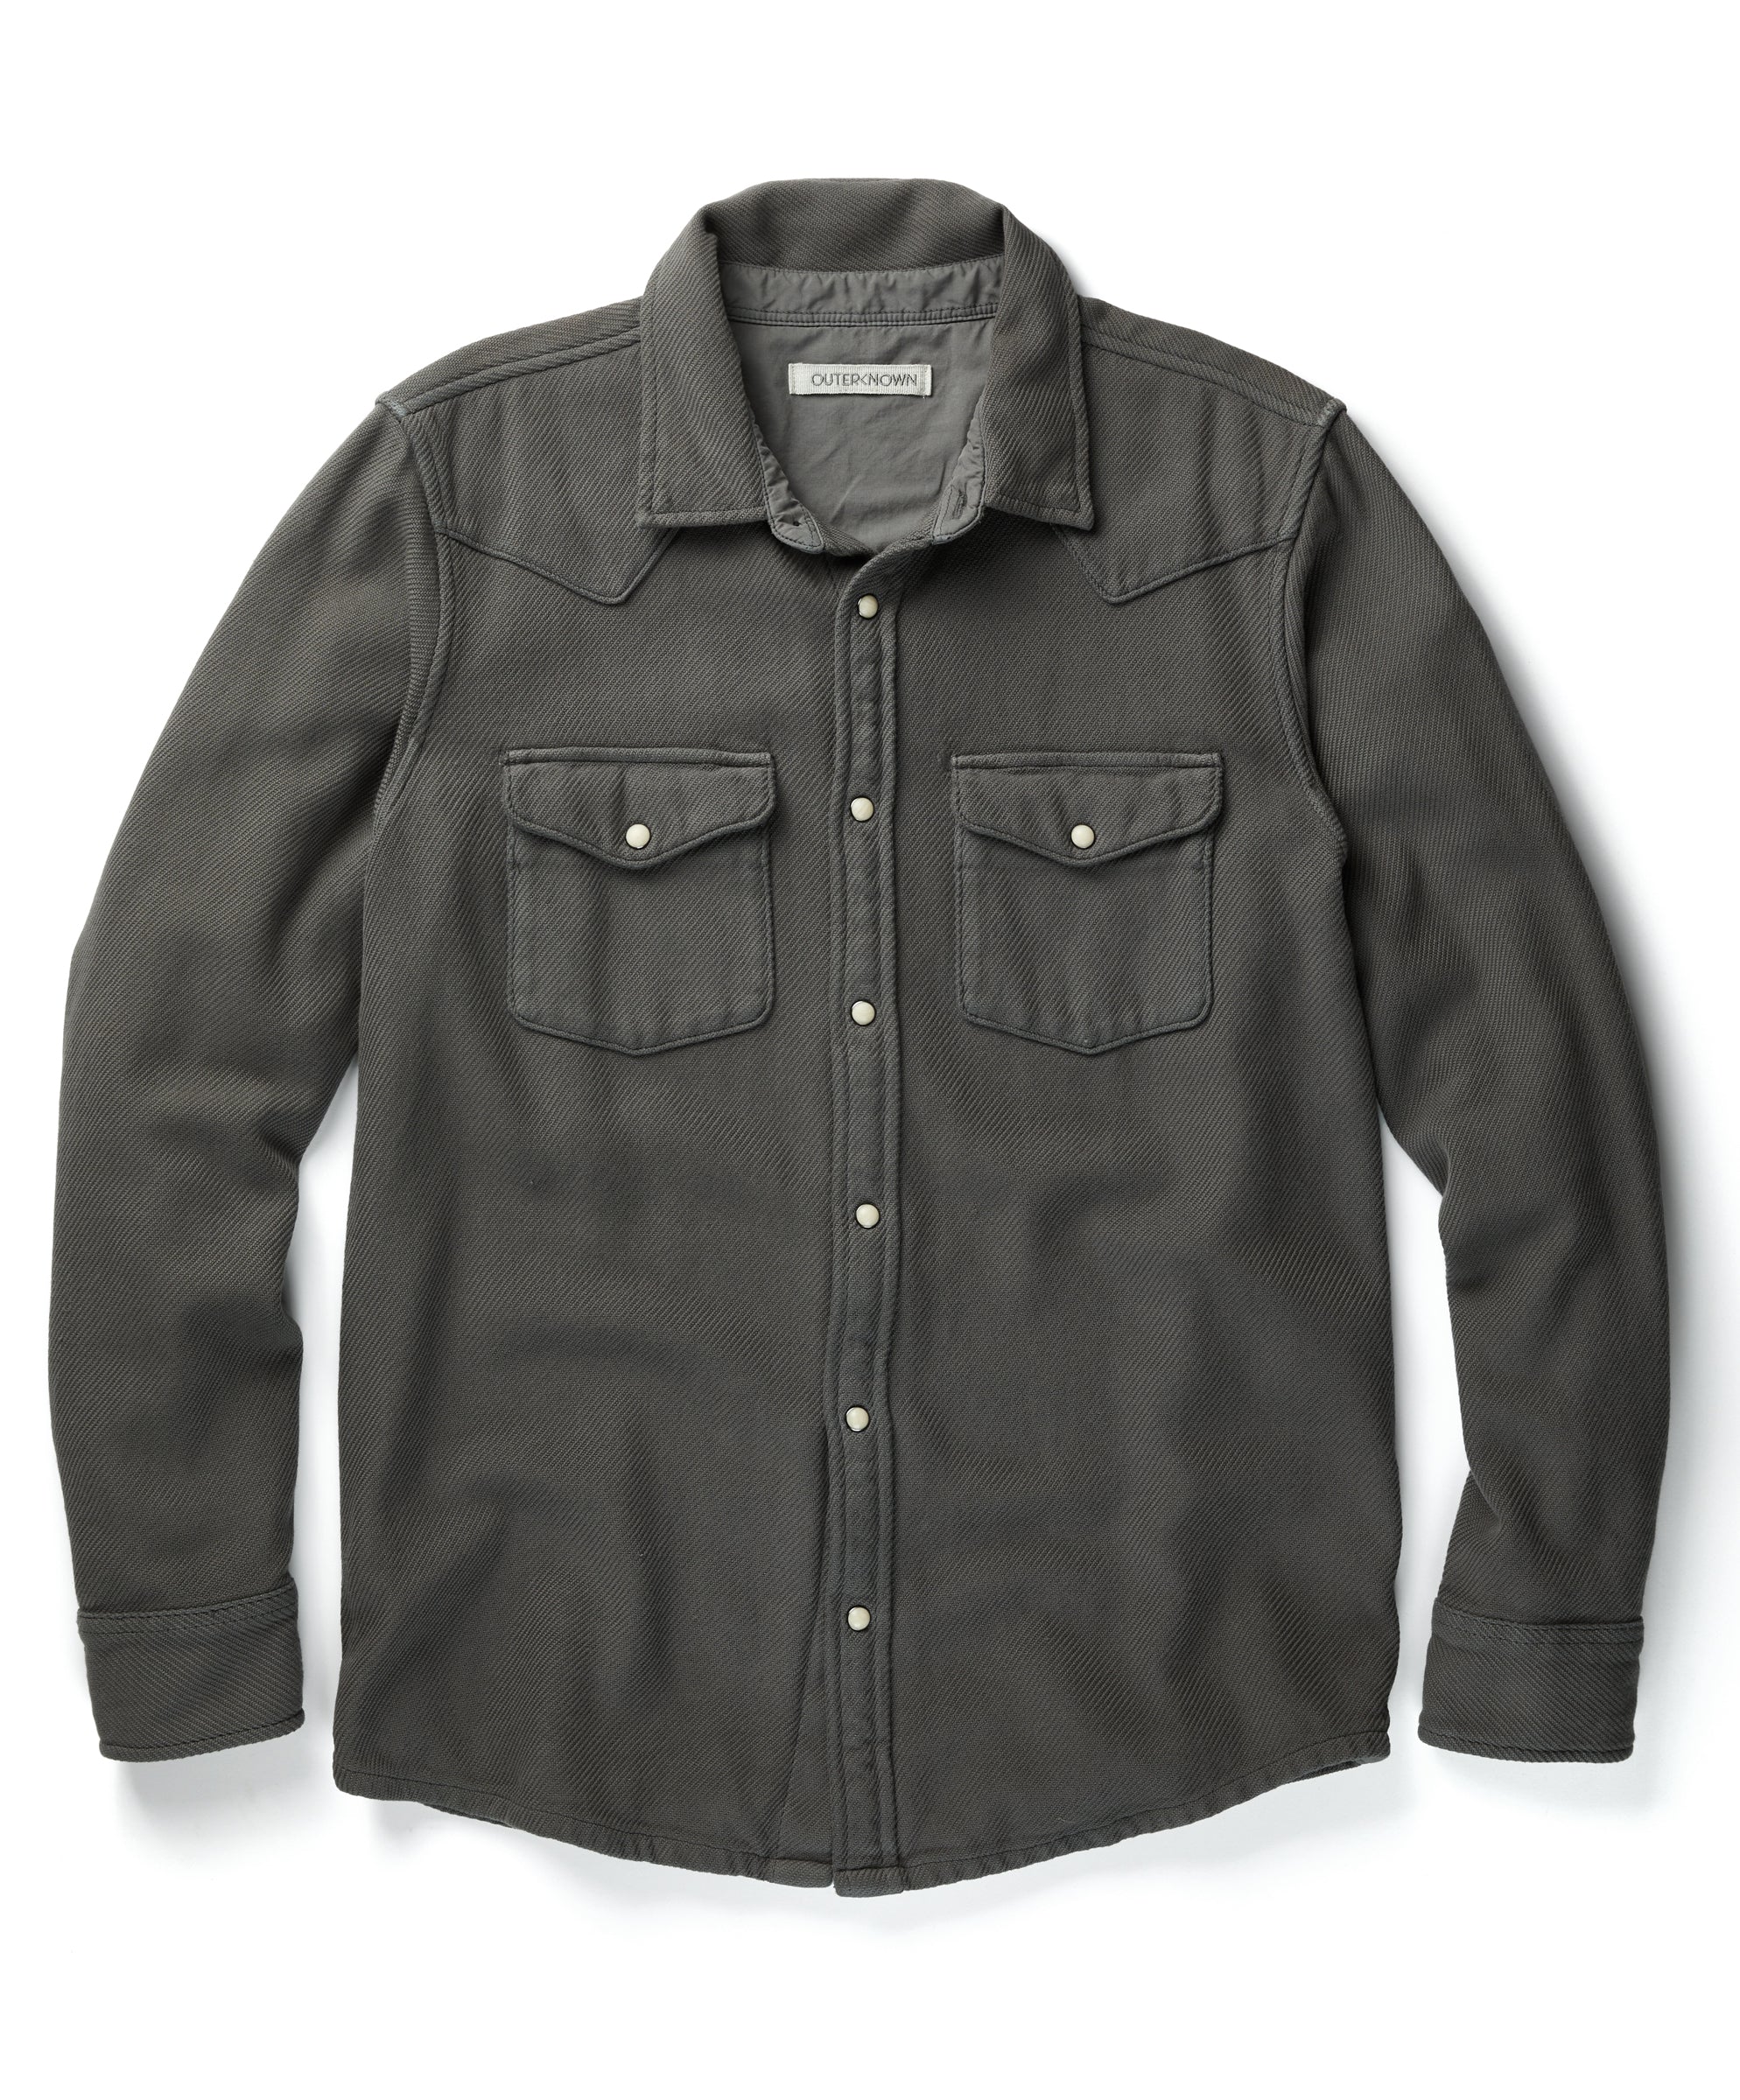 Westerly Blanket Shirt | Men's Shirts | Outerknown